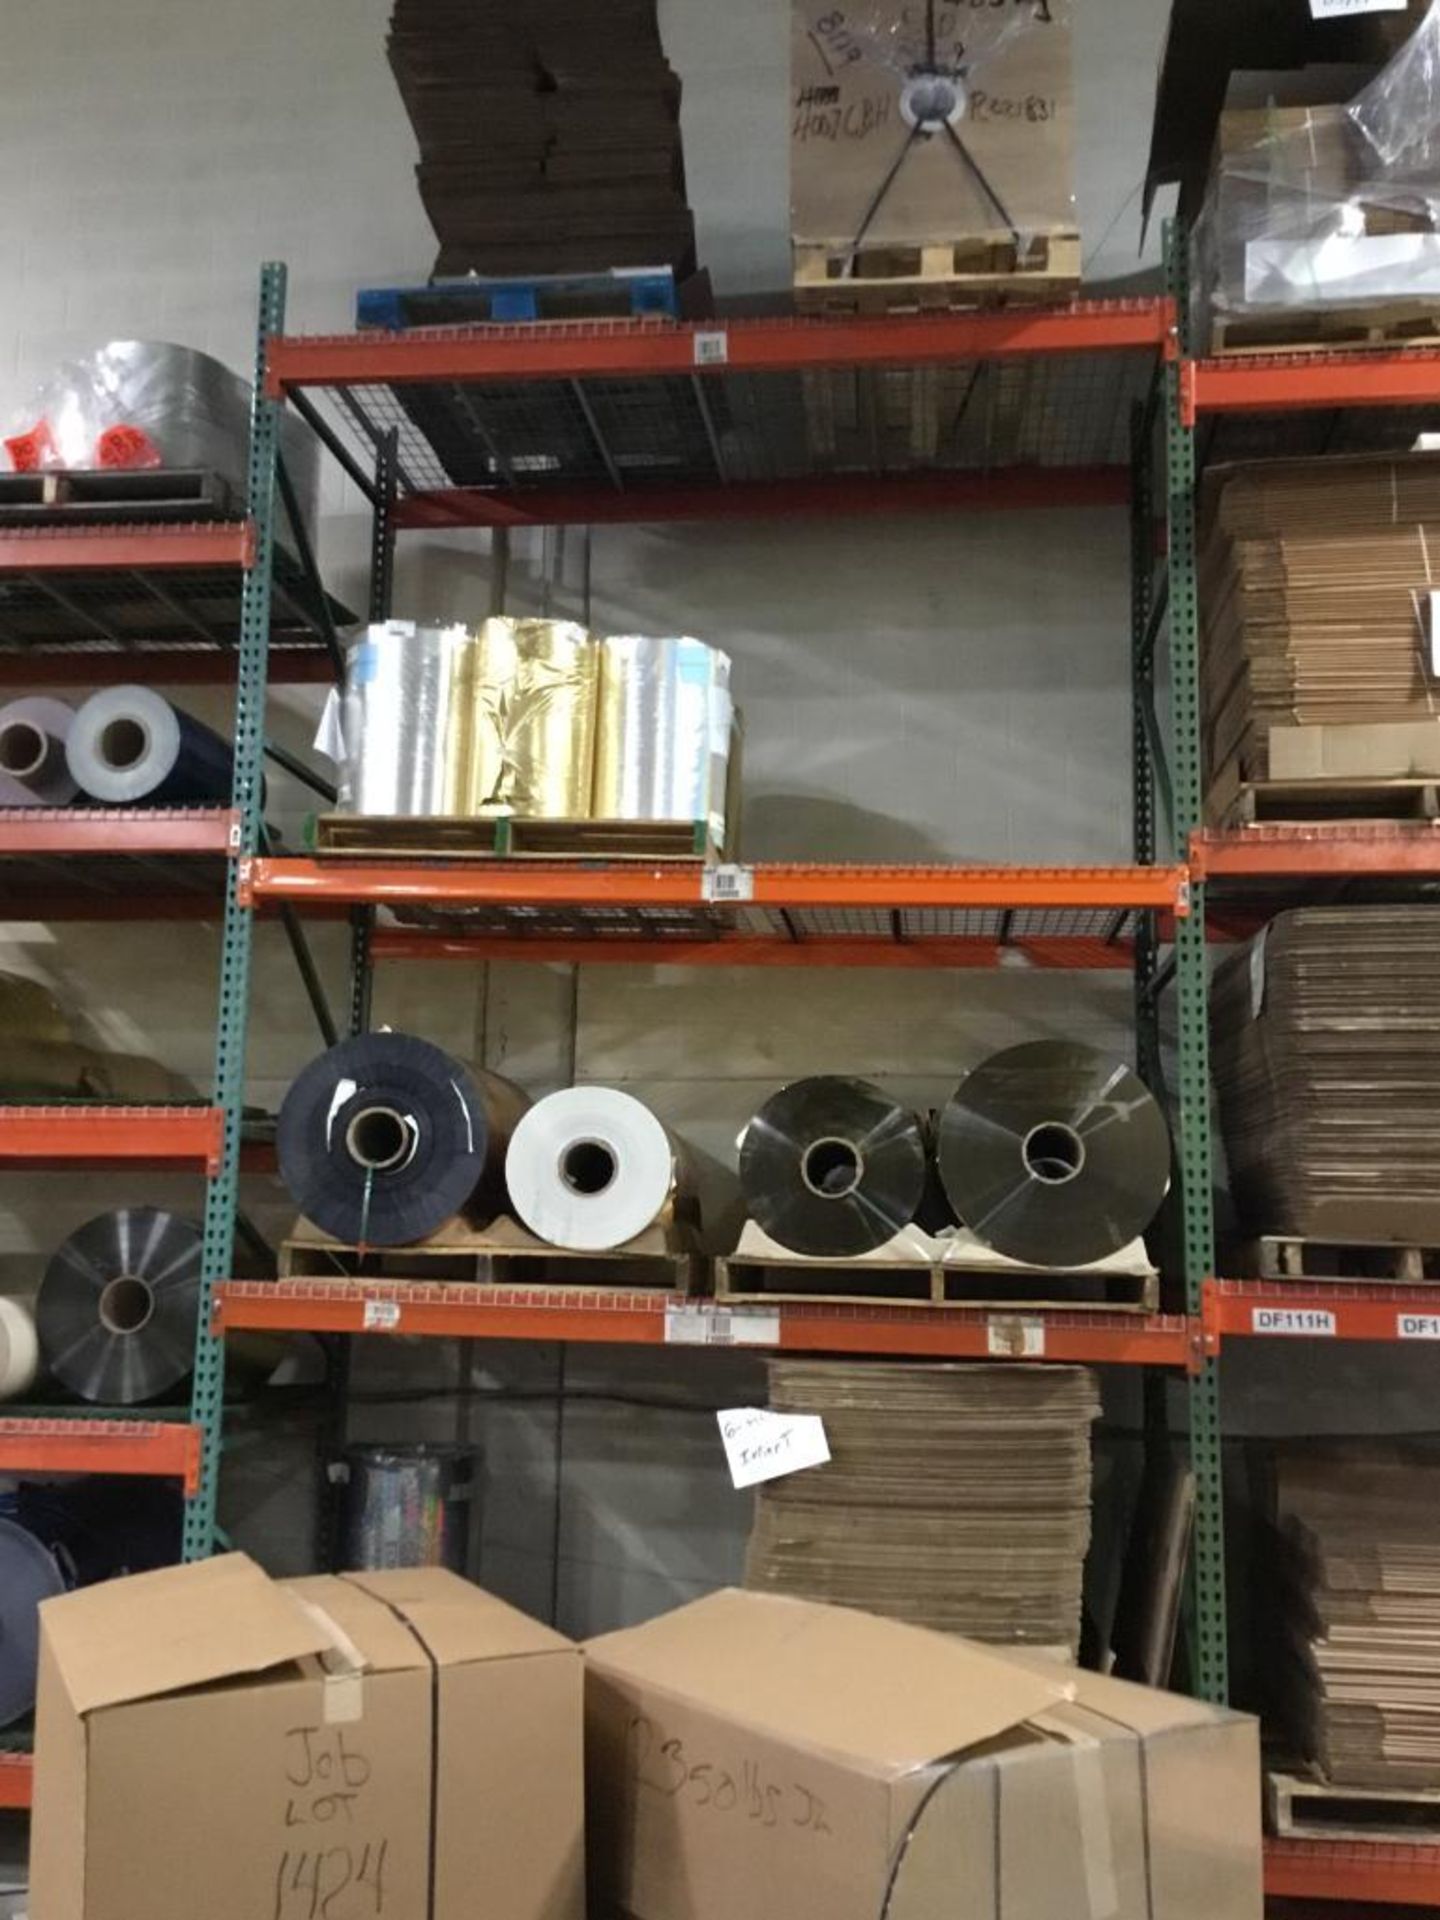 LOT: Entire Contents of Foil Roll Inventory in Building. On Shelving, Pallet Racking, Gaylords, etc. - Image 5 of 16